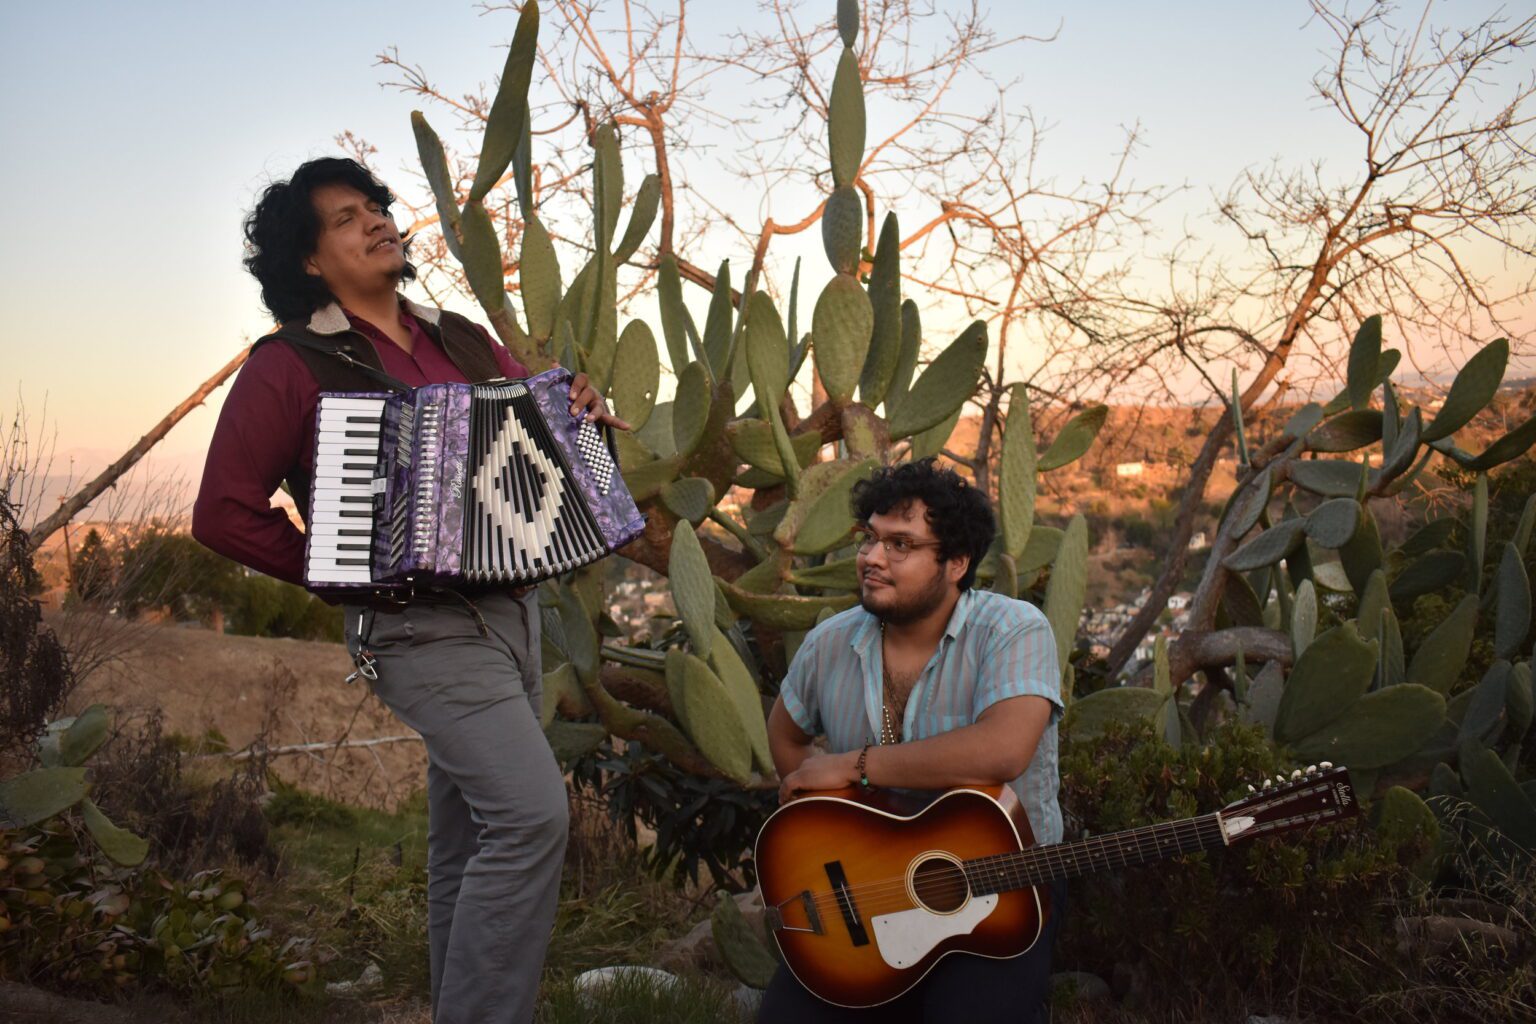 Hear the “psychedelic cumbia punk” sounds of Tropa Magica when brothers David and Rene Pacheco make a tour stop in Bellingham Monday